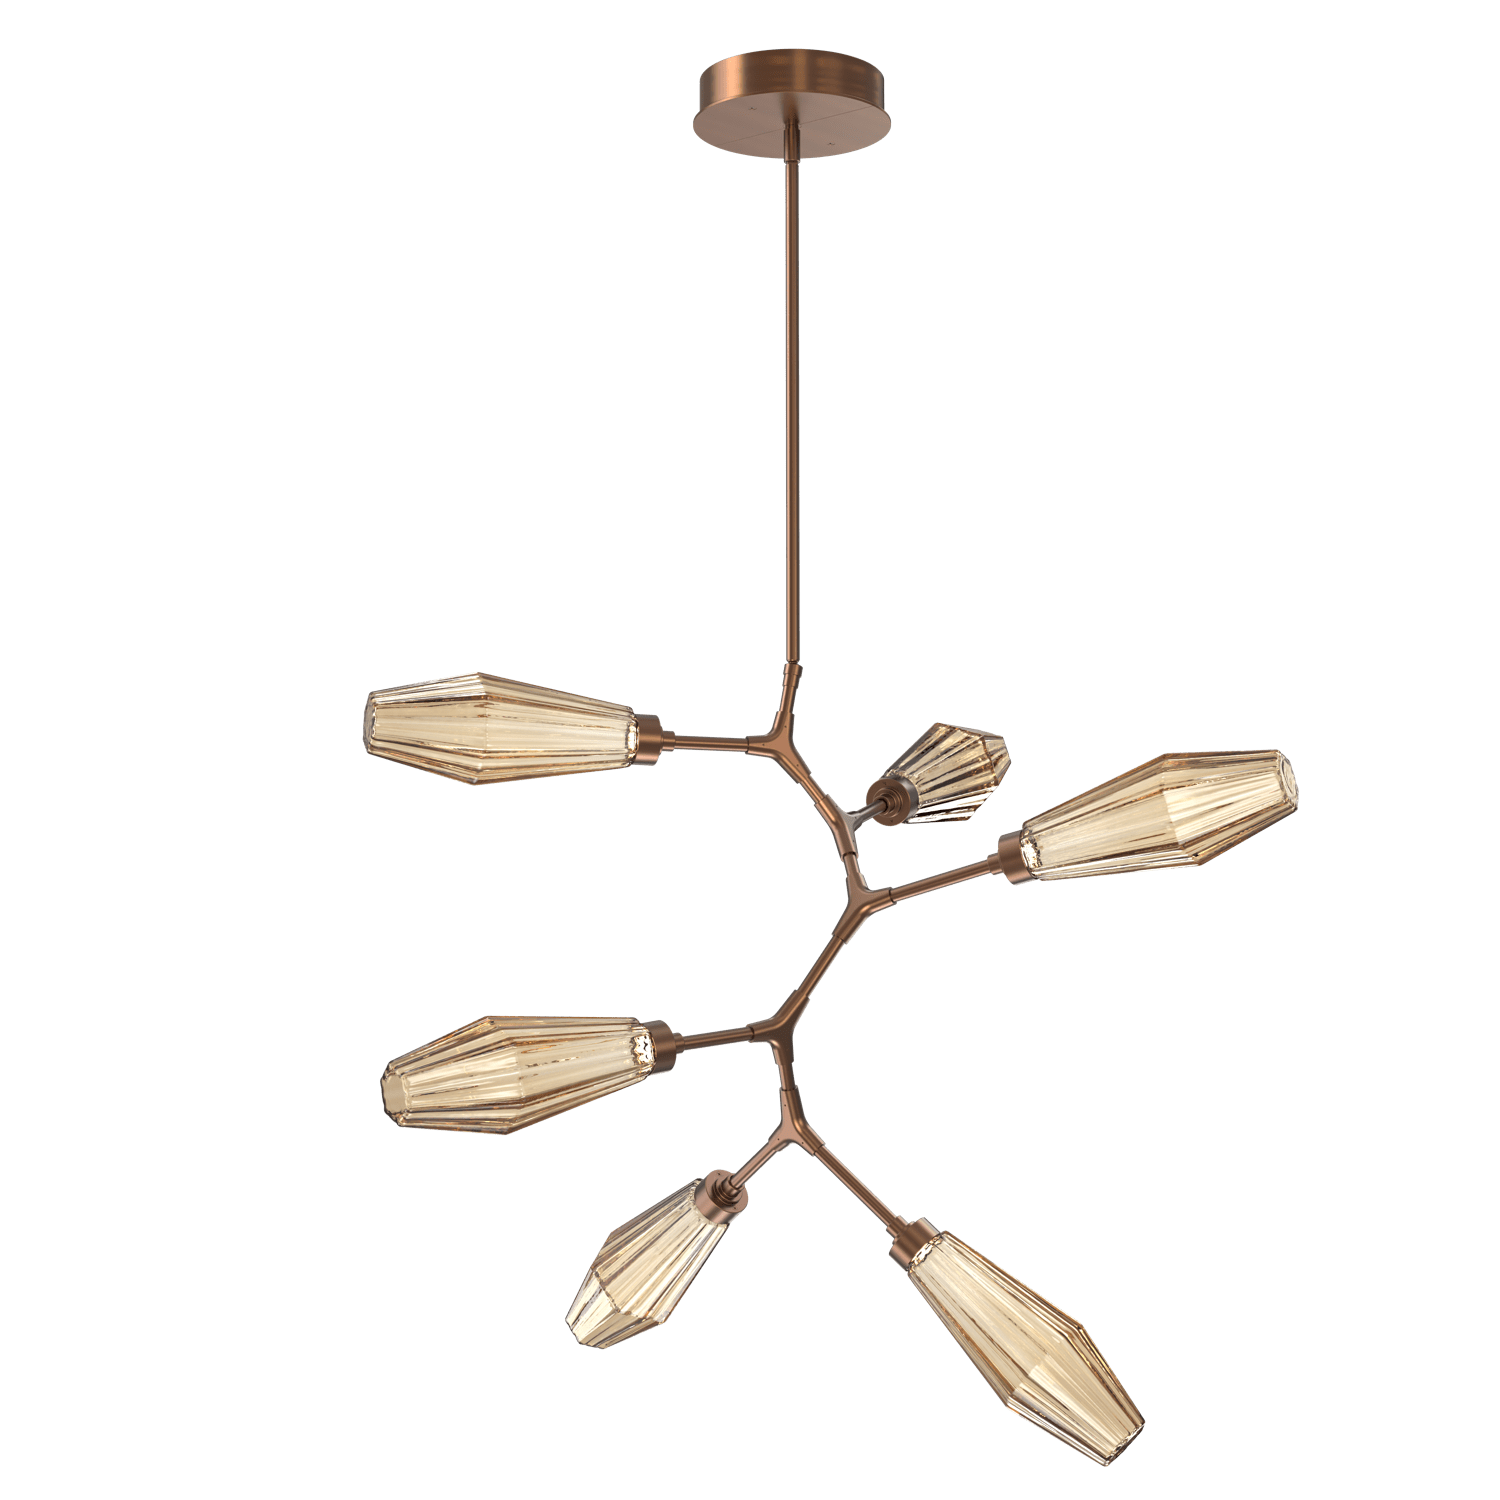 CHB0049-VA-RB-RB-Hammerton-Studio-Aalto-6-light-modern-vine-chandelier-with-oil-rubbed-bronze-finish-and-optic-ribbed-bronze-glass-shades-and-LED-lamping